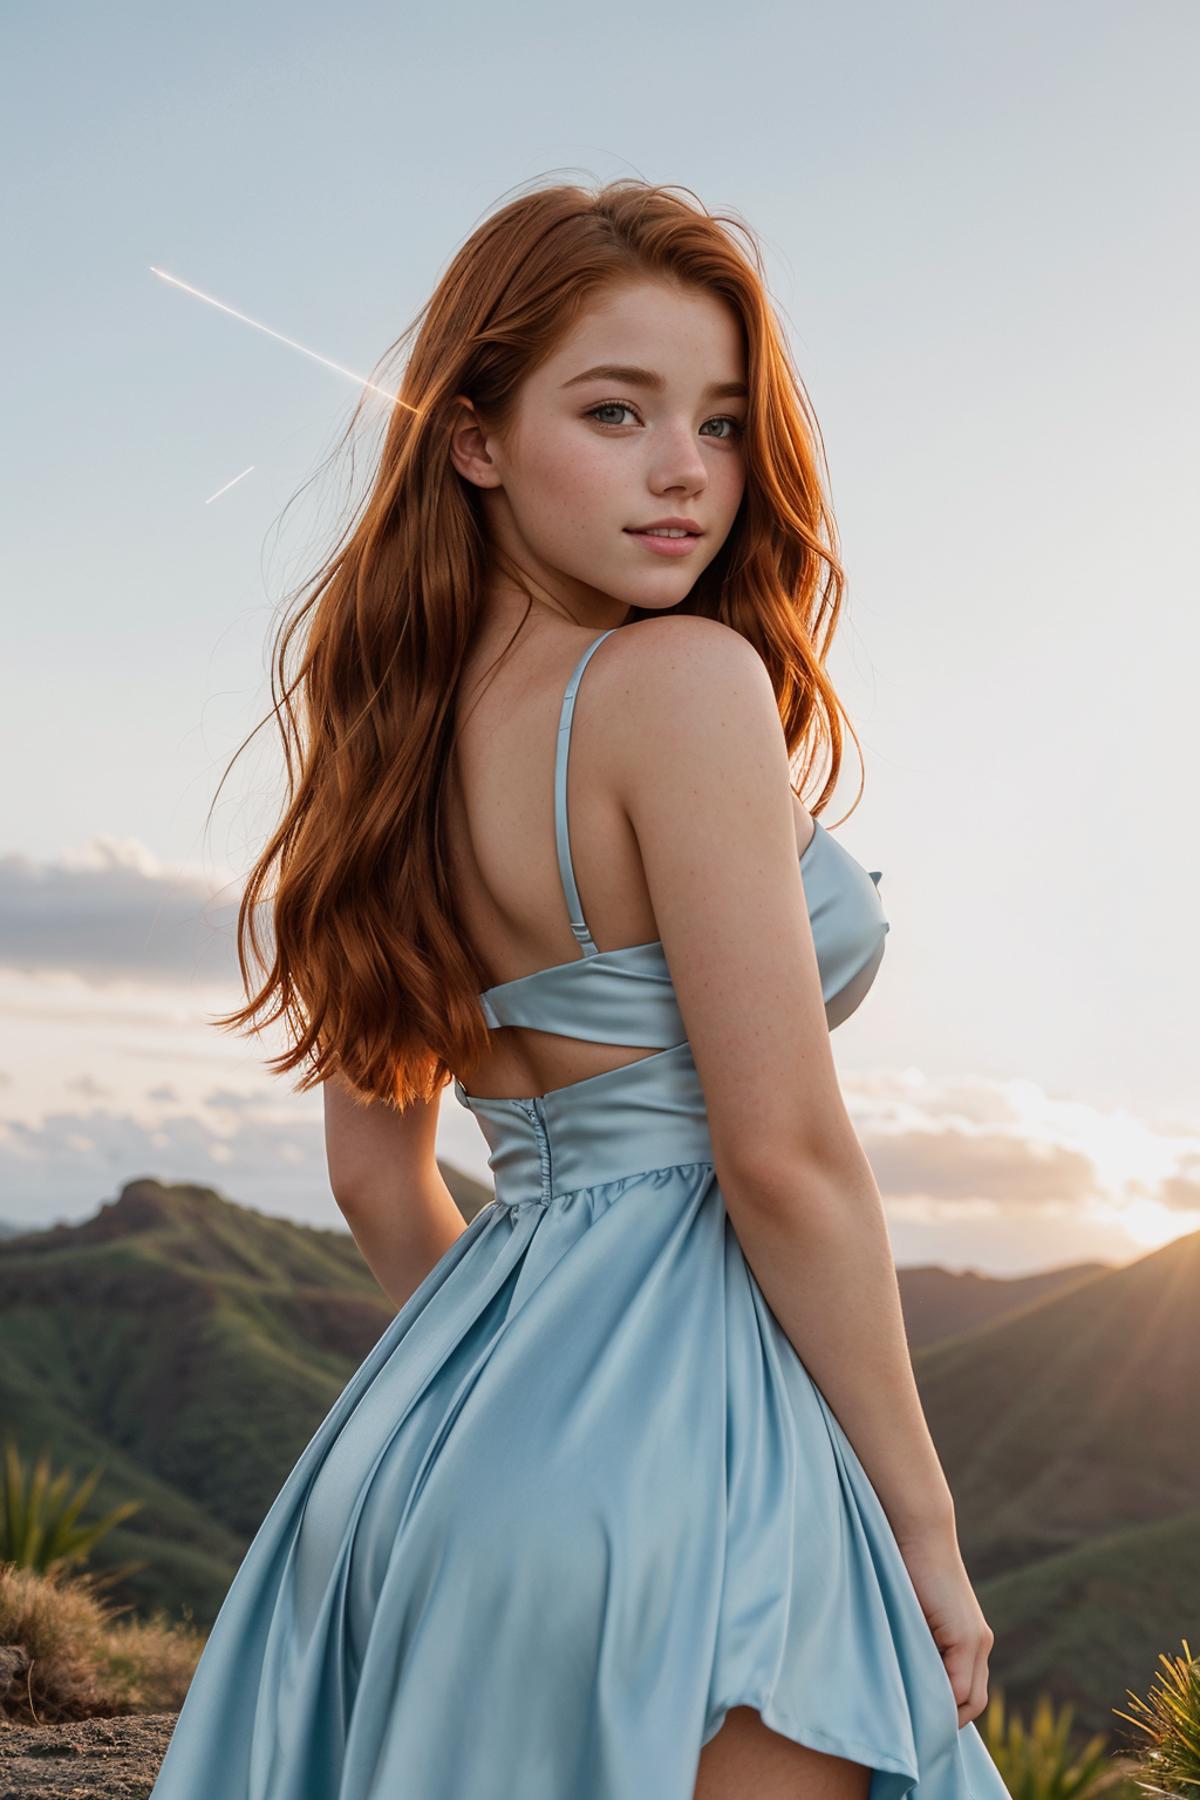 A red-haired woman in a blue dress posing for a picture in front of a sunset.